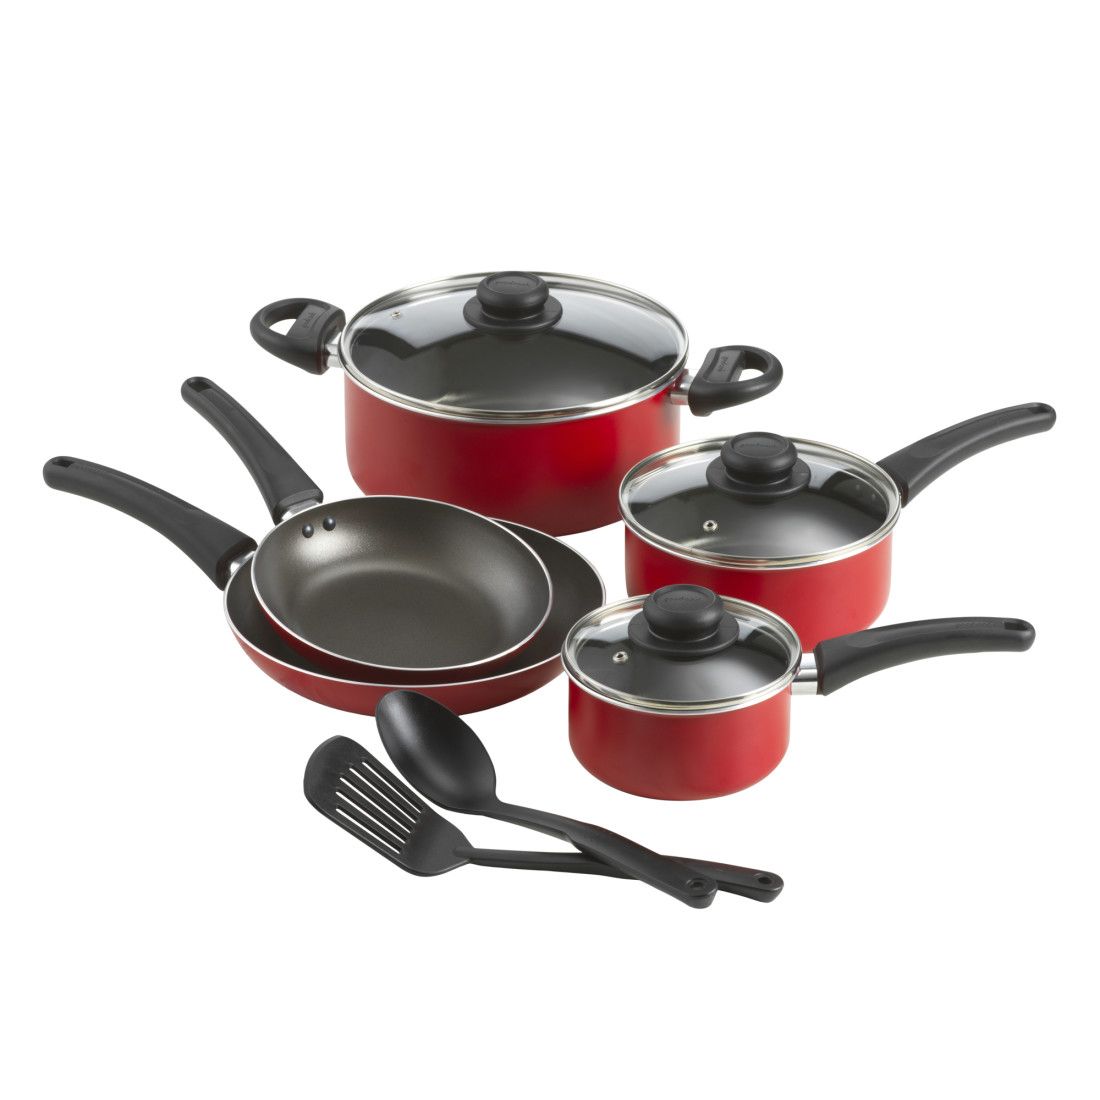 The Goodful 10-Piece Cookware. From sauté to simmer, the set that